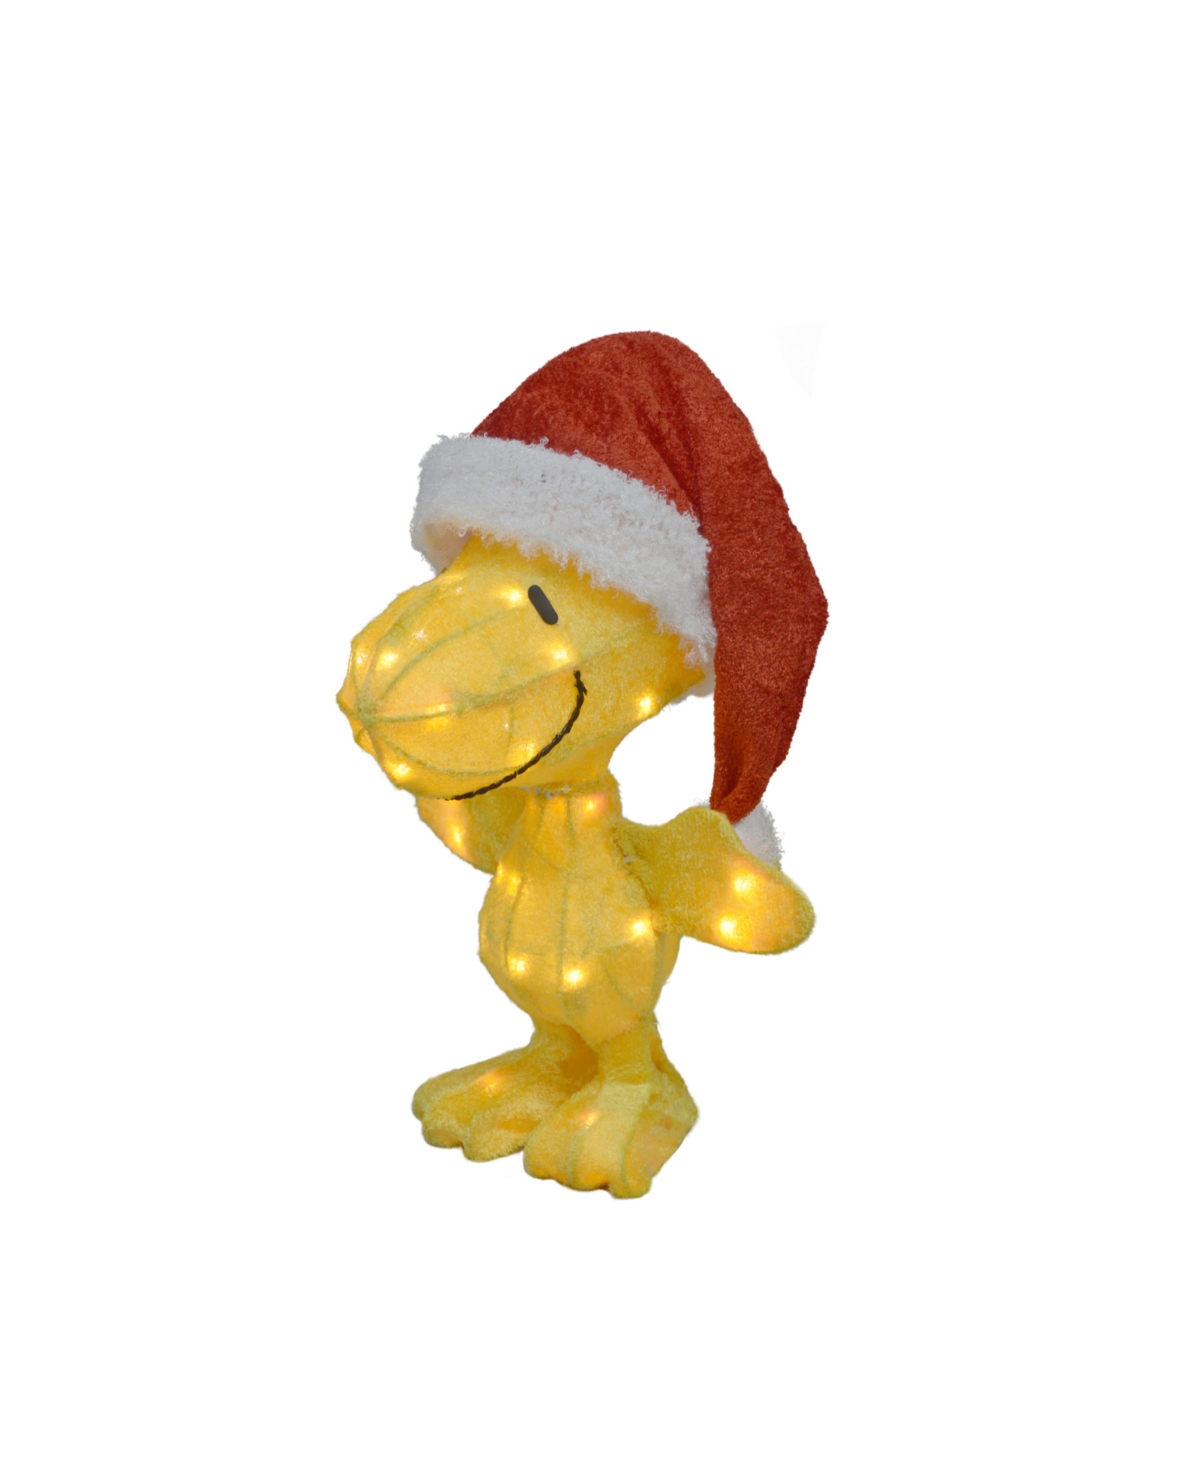 18" Lighted Woodstock in Santa Hat Outdoor Christmas Yard Decoration - Yellow